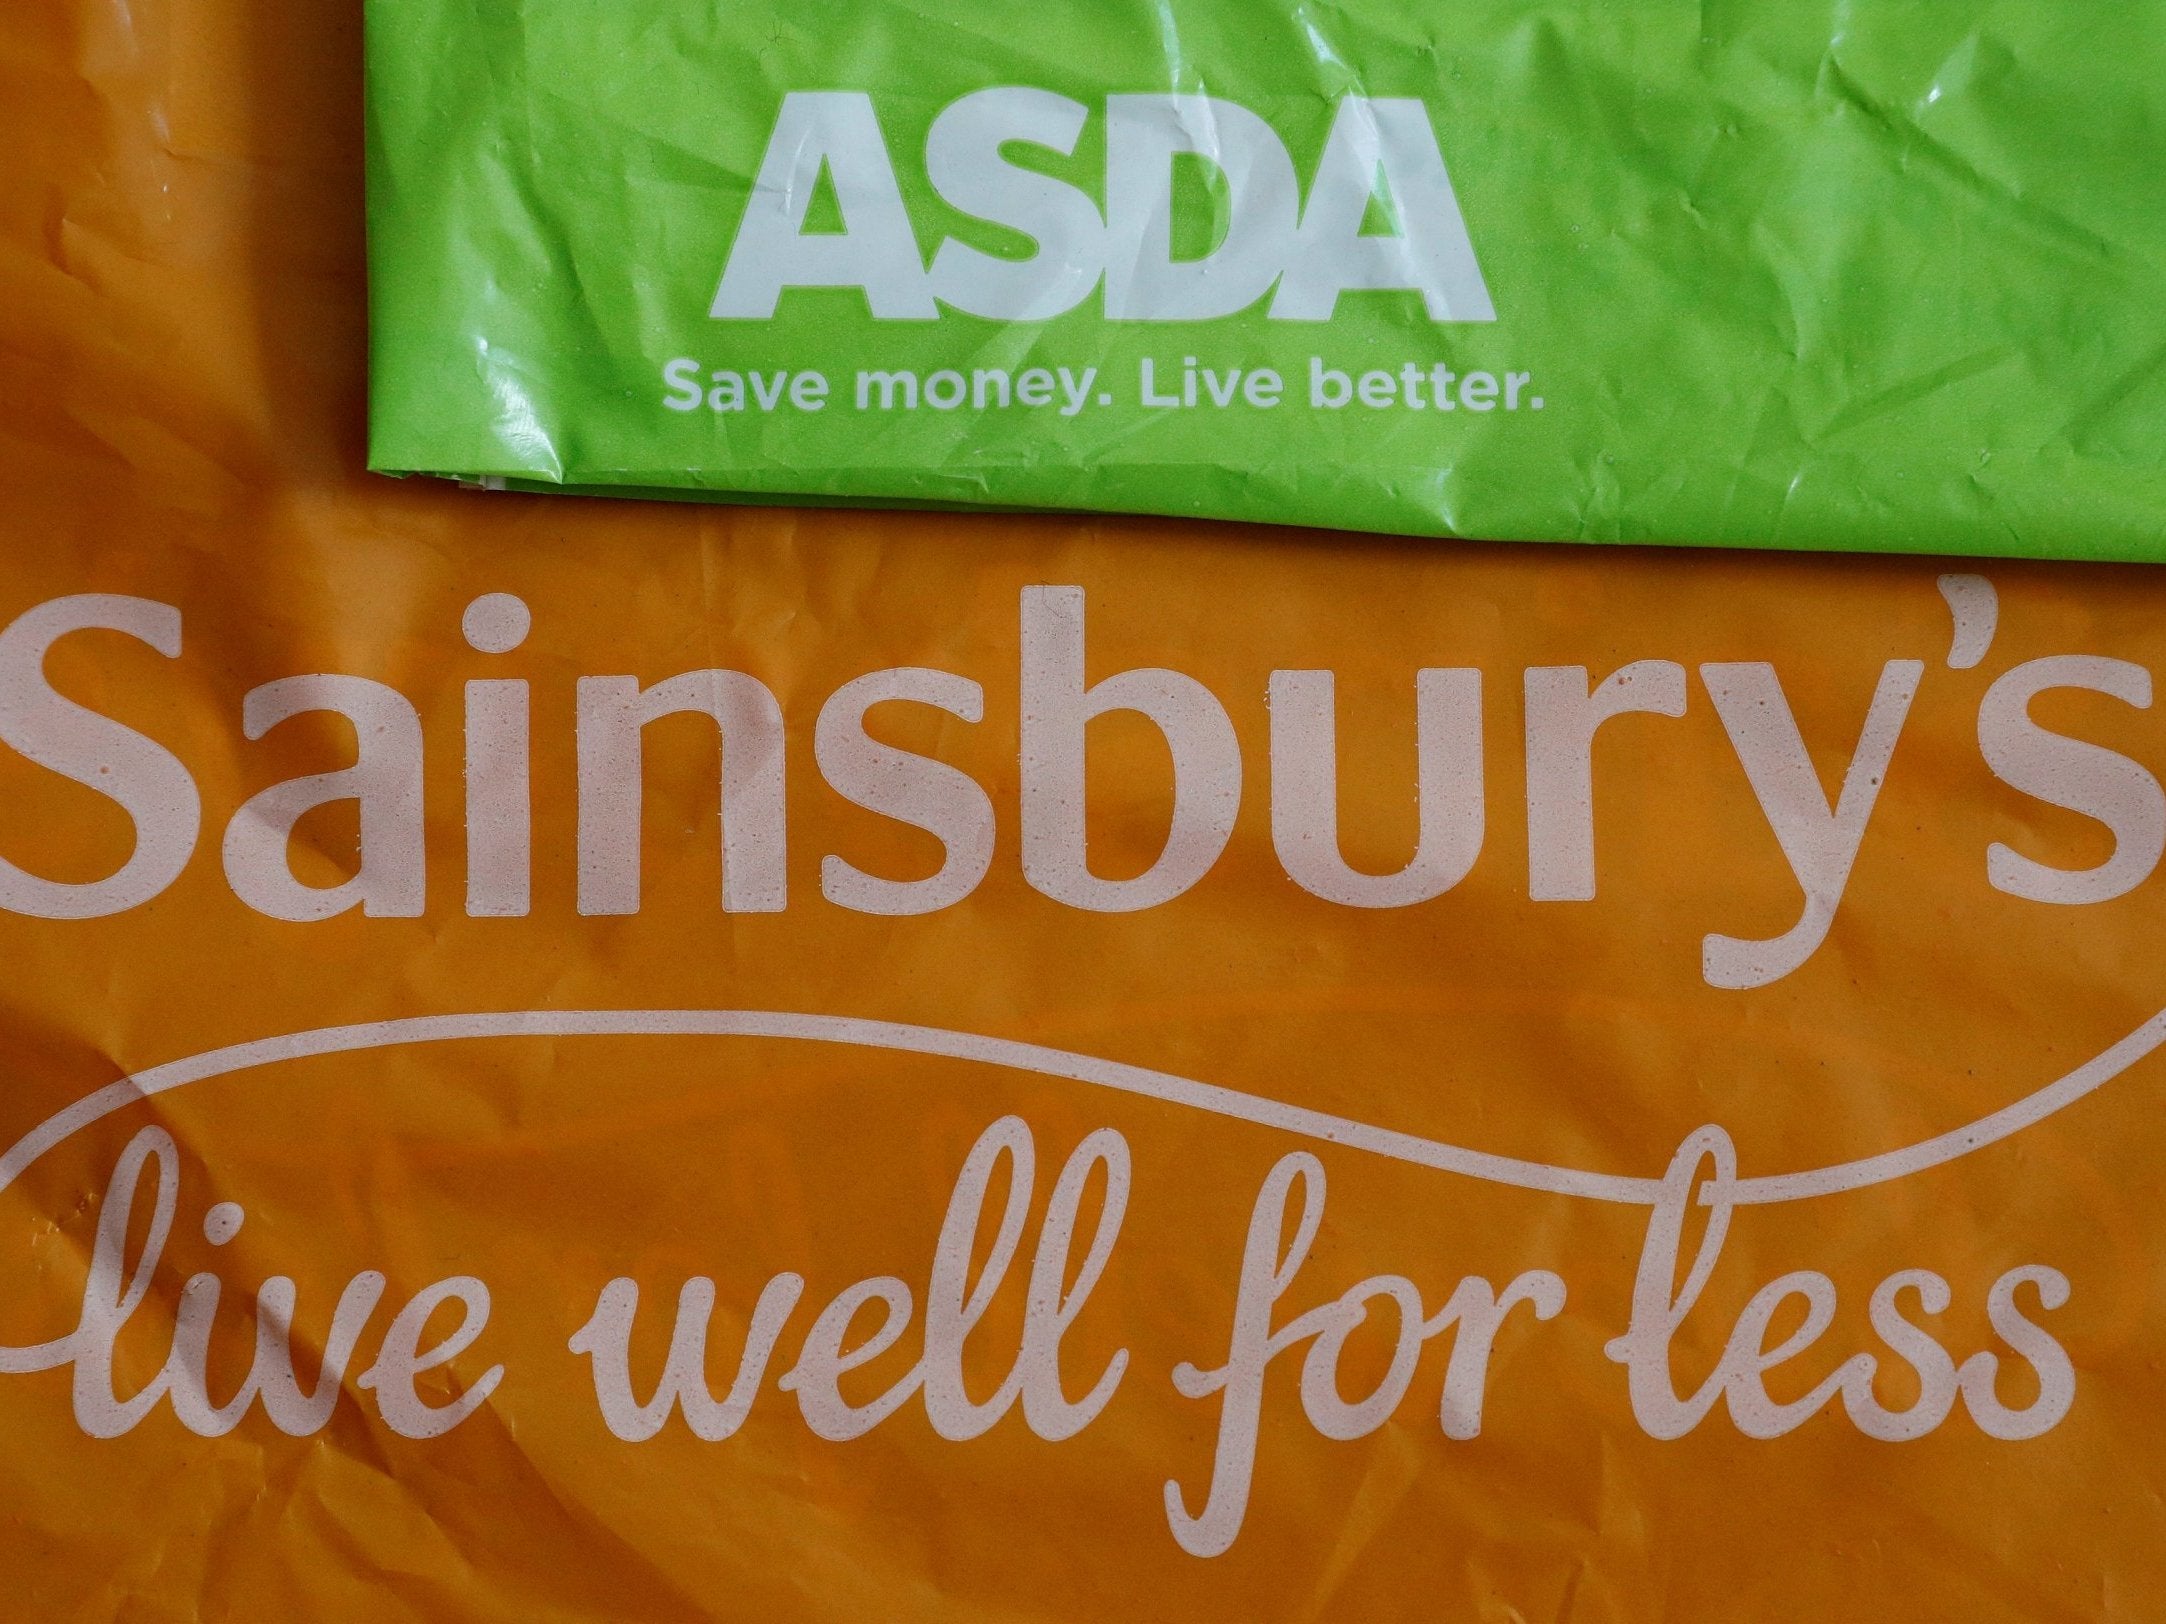 Sainsbury's and Asda must win the support of the Competition & Markets Authority to get their deal through